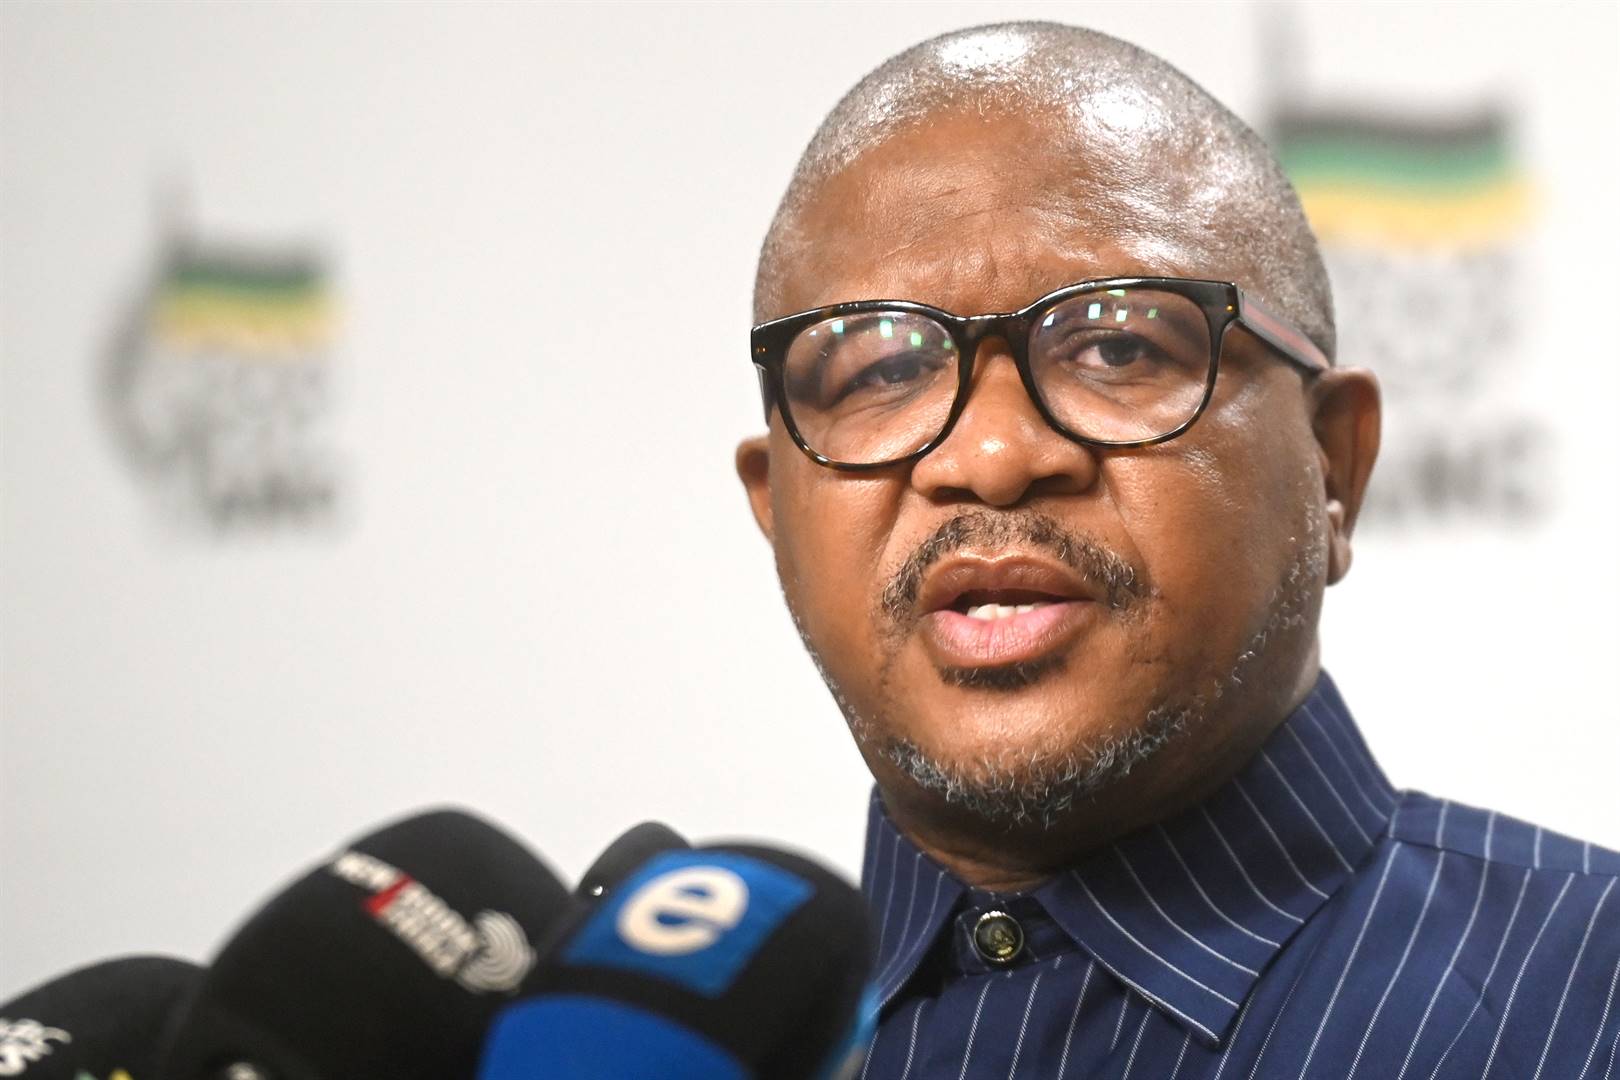 ANC secretary-general Fikile Mbalula has informed the Youth League's interim leaders that the party's national working committee has decided to reconfigure the structure.